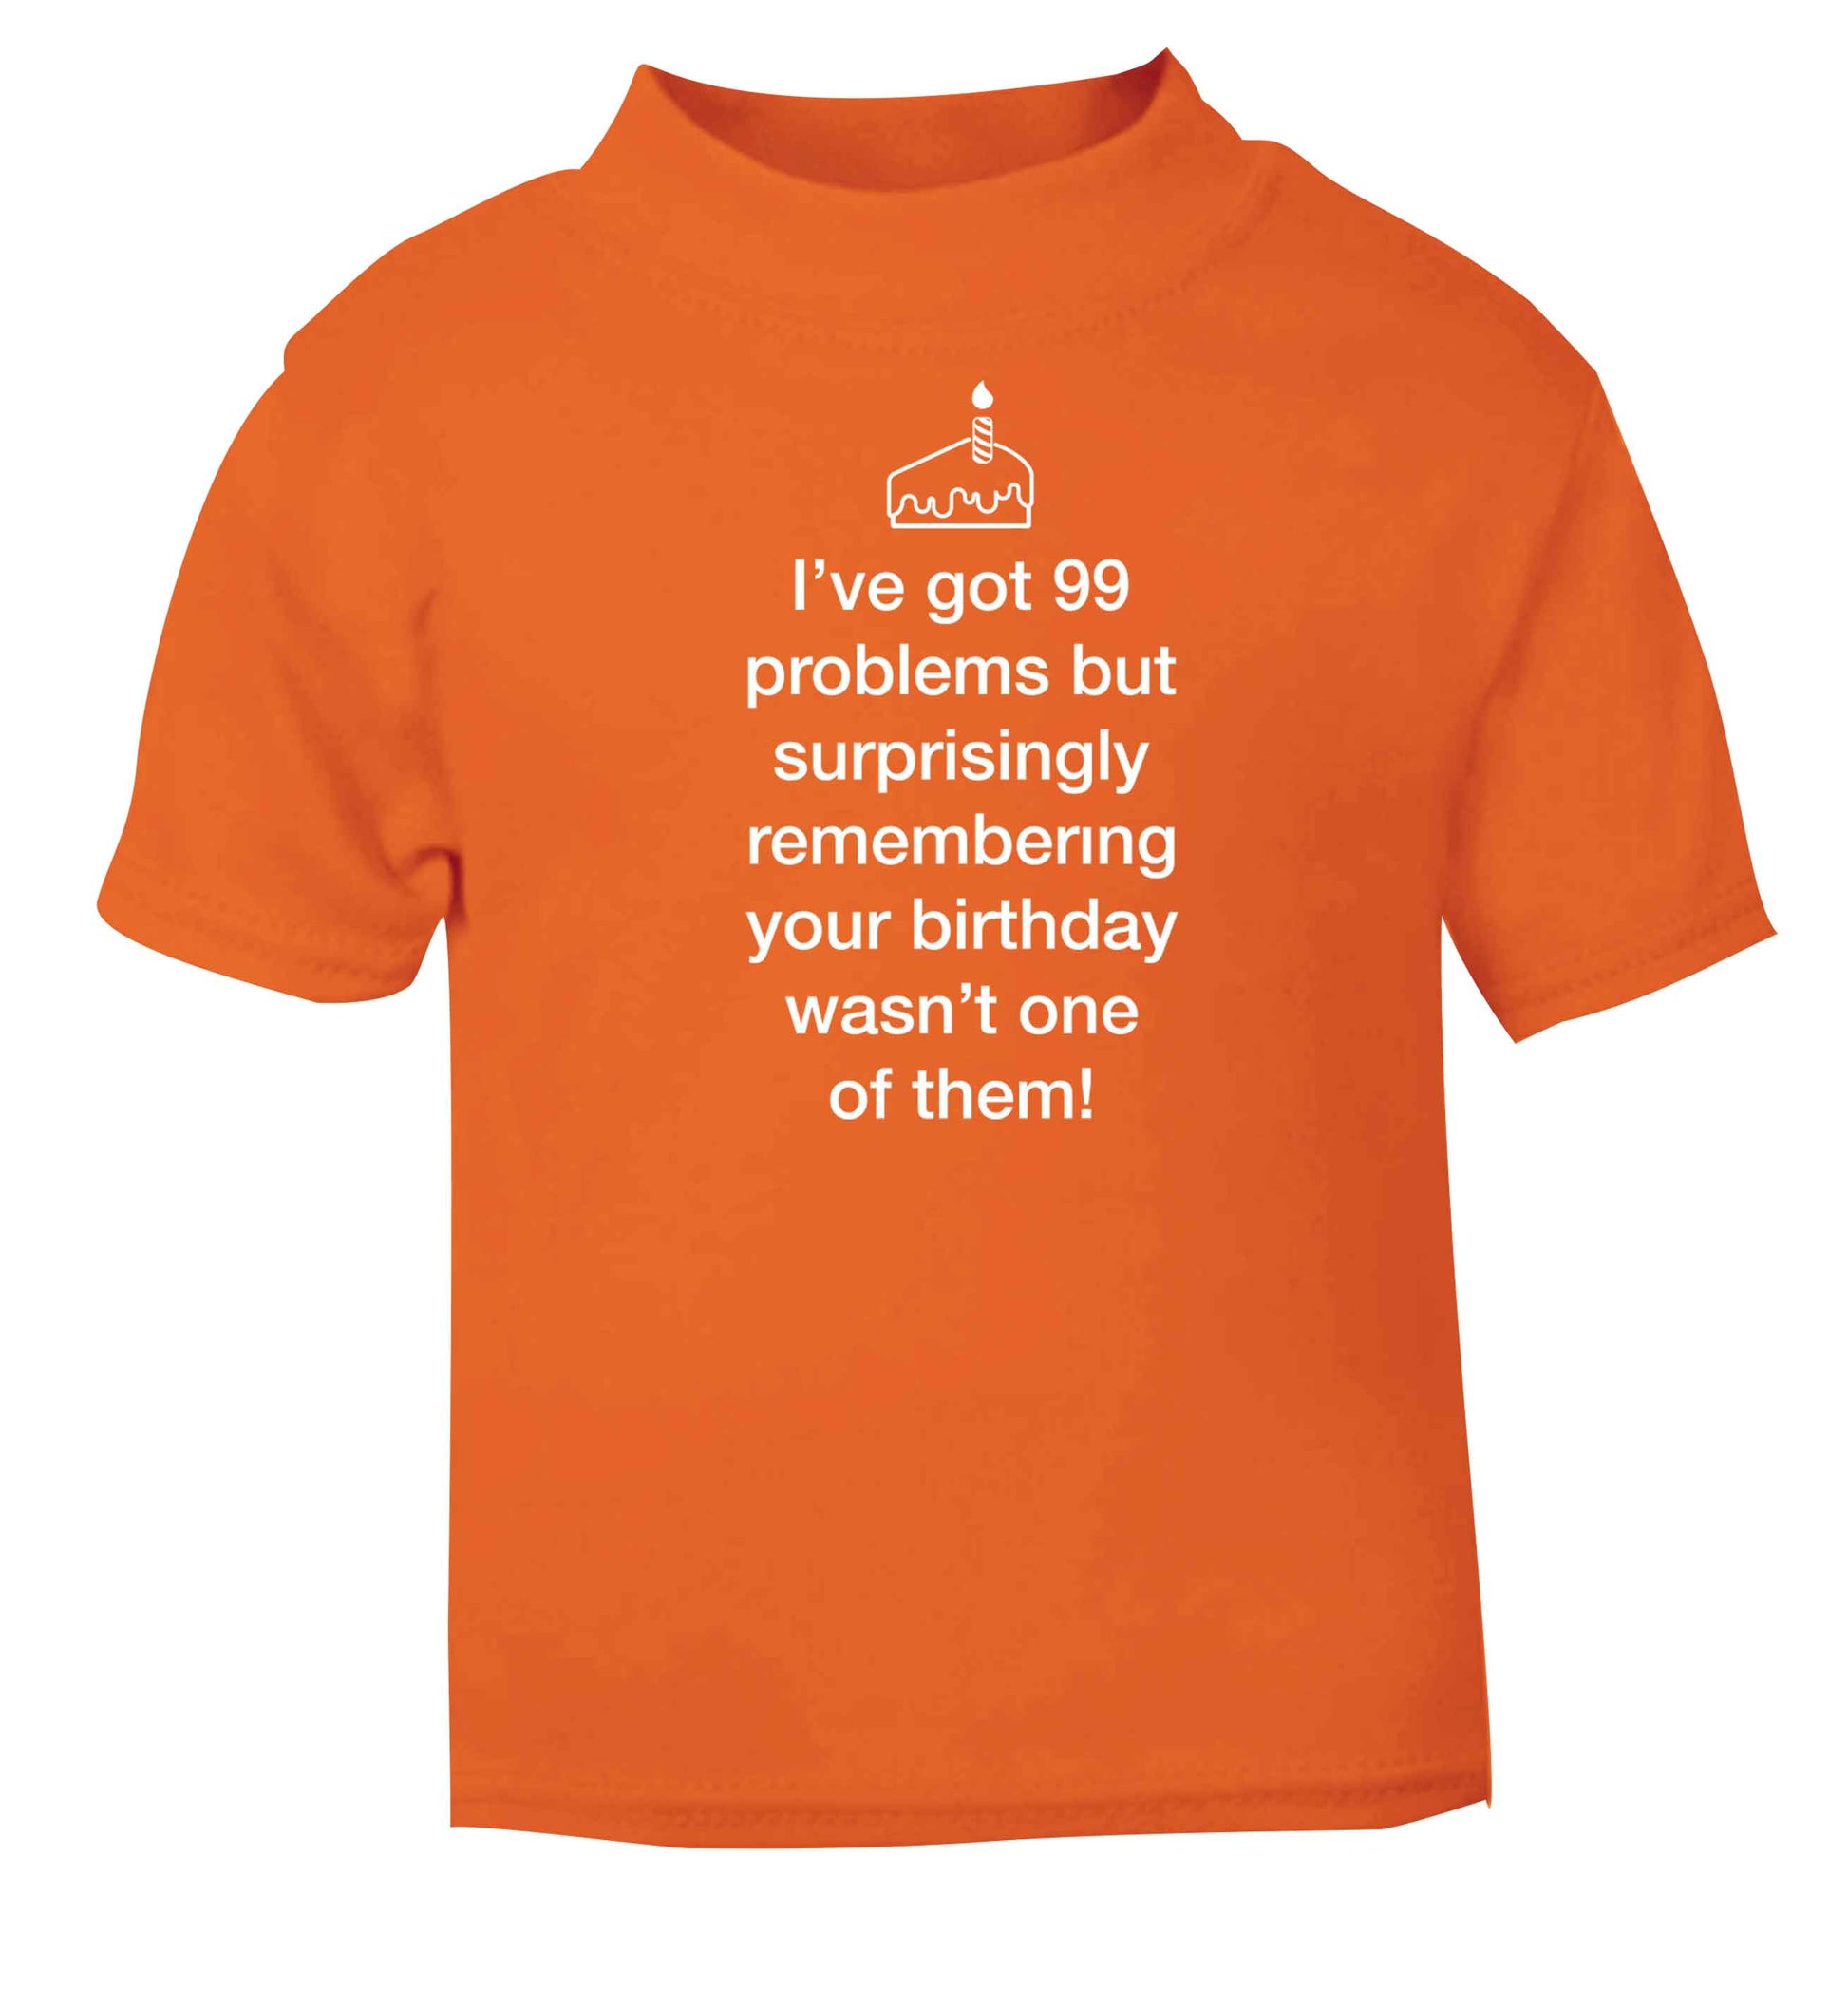 I've got 99 problems but surprisingly remembering your birthday wasn't one of them! orange baby toddler Tshirt 2 Years